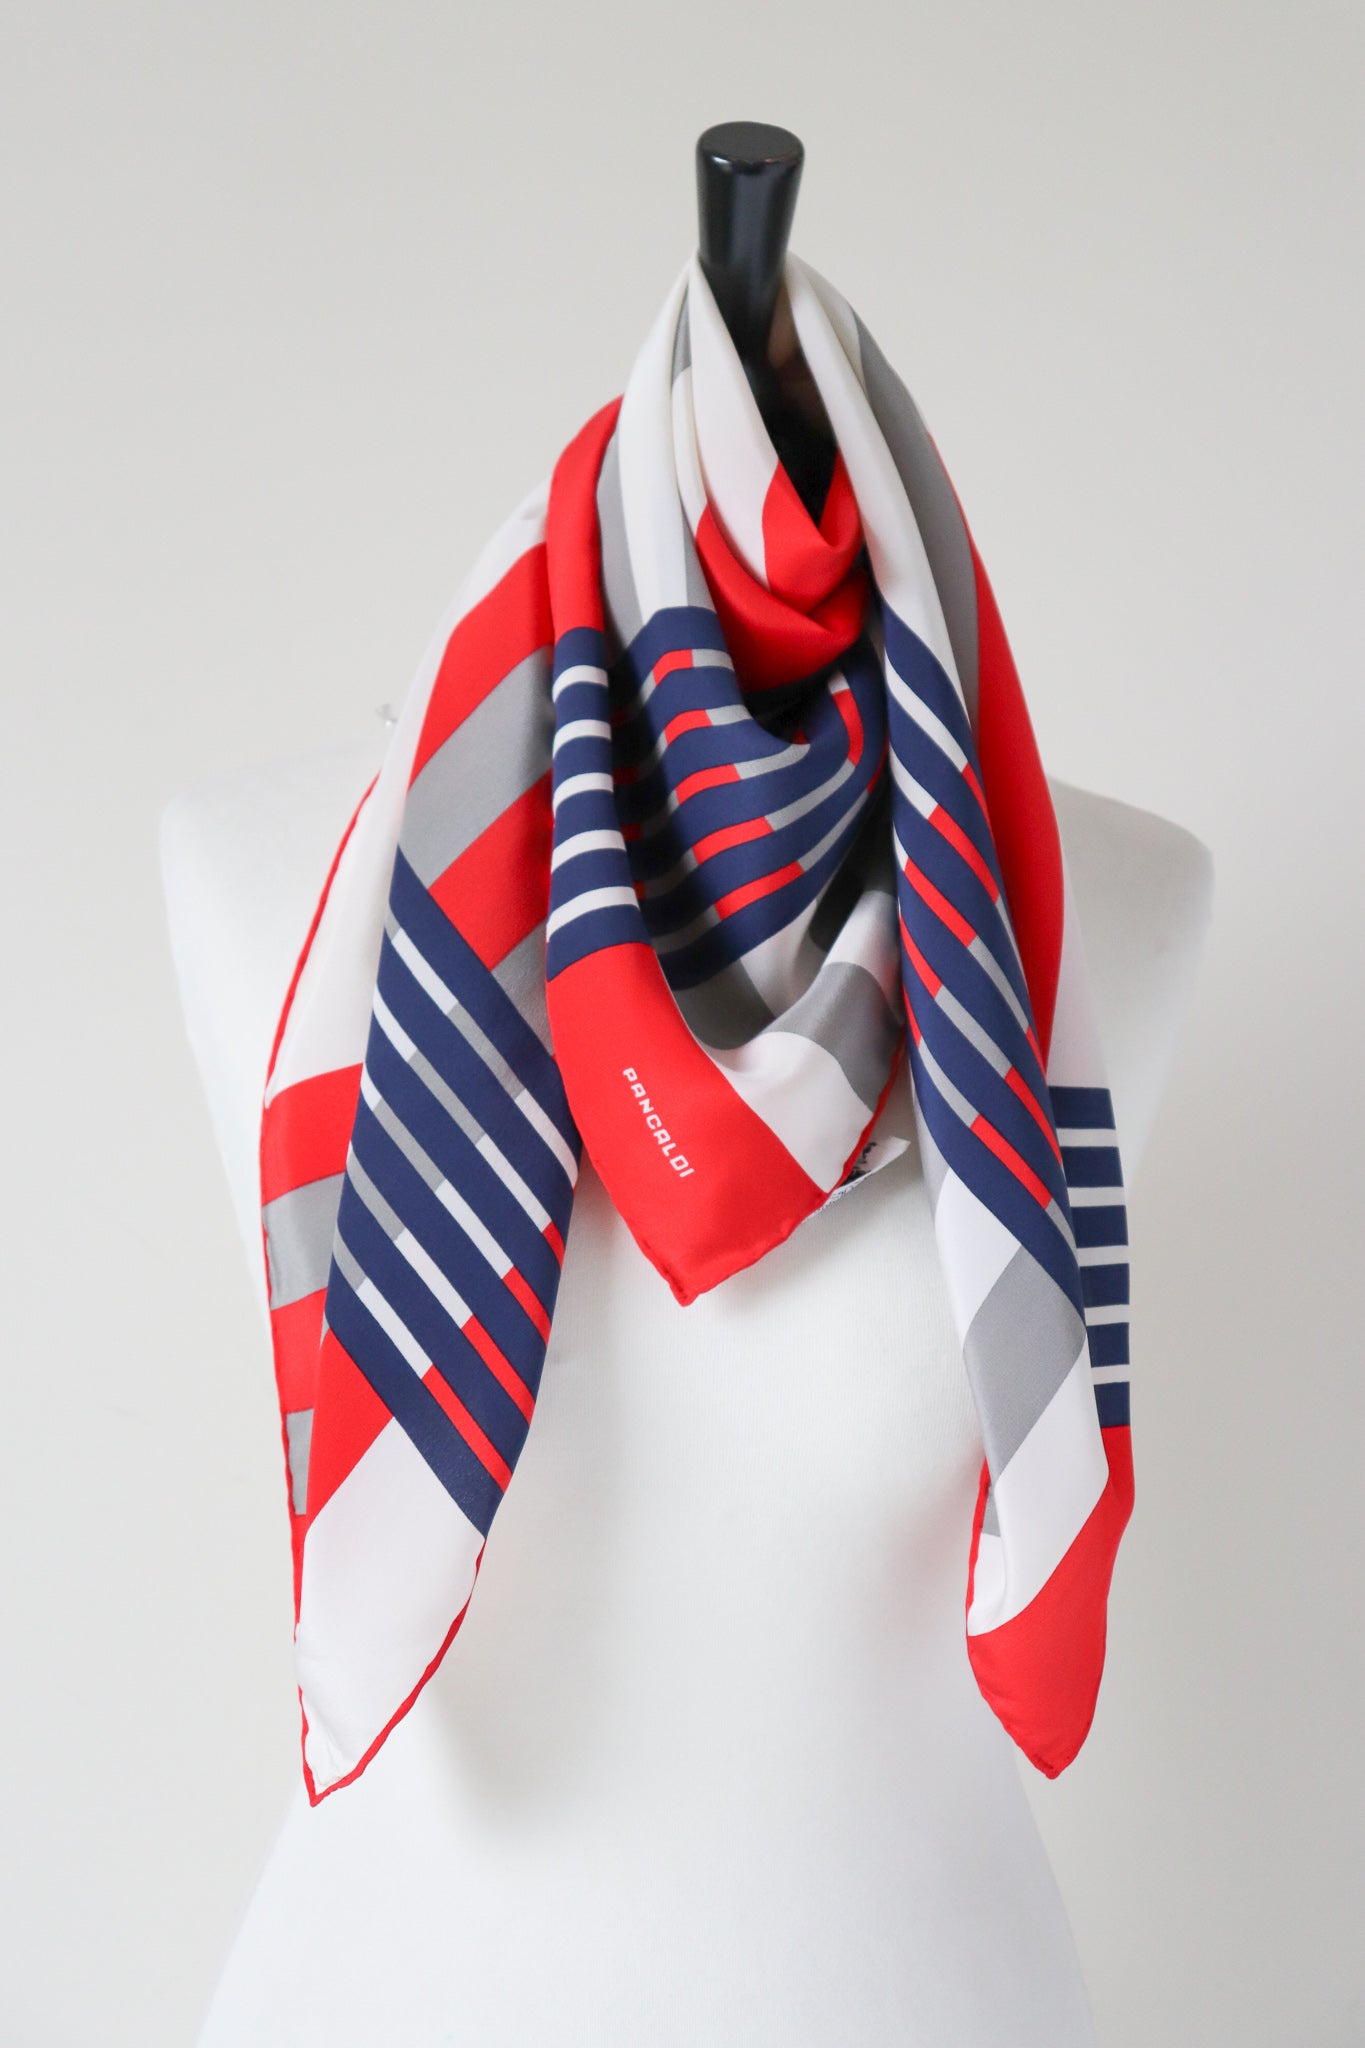 PANCALDI Silk Scarf  - Red / Blue / Ivory - Checked / Striped  -  LARGE